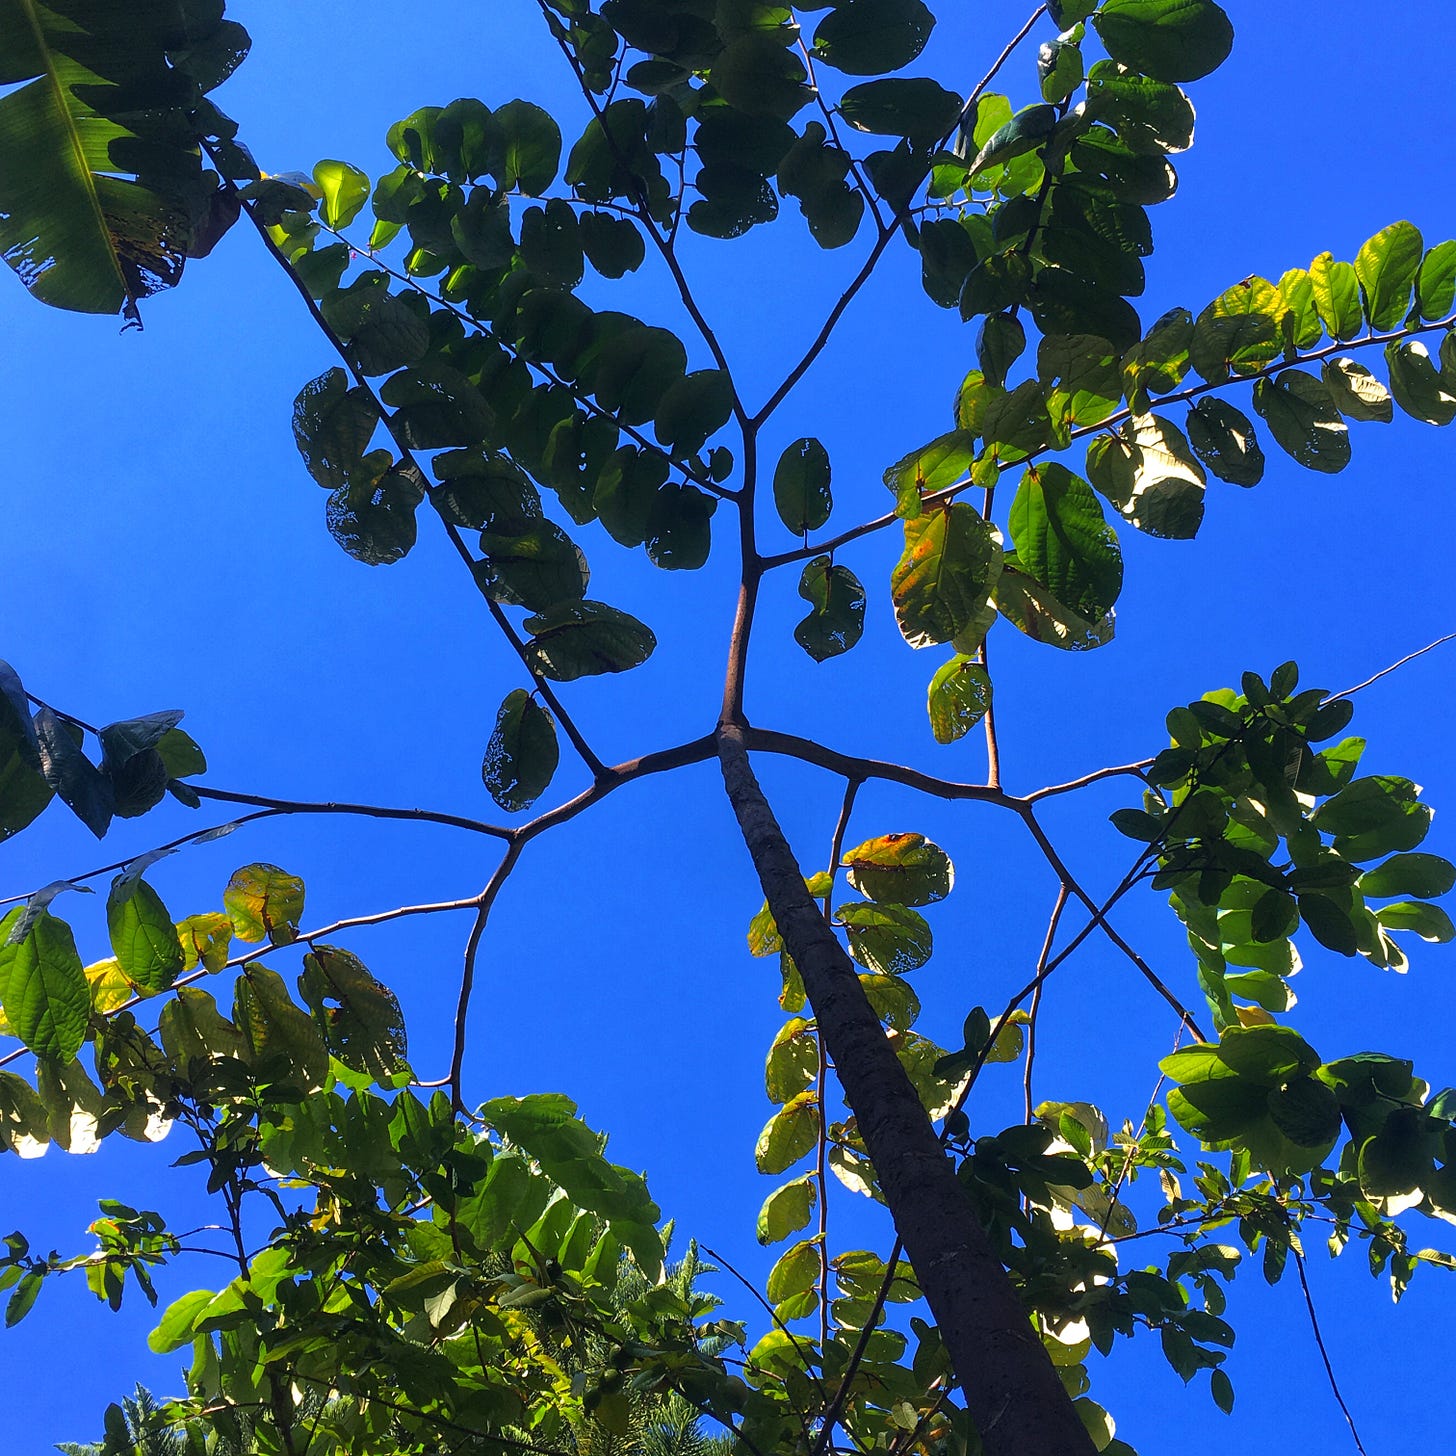 Theobroma bicolor jaguar cacao branches against a blue sky